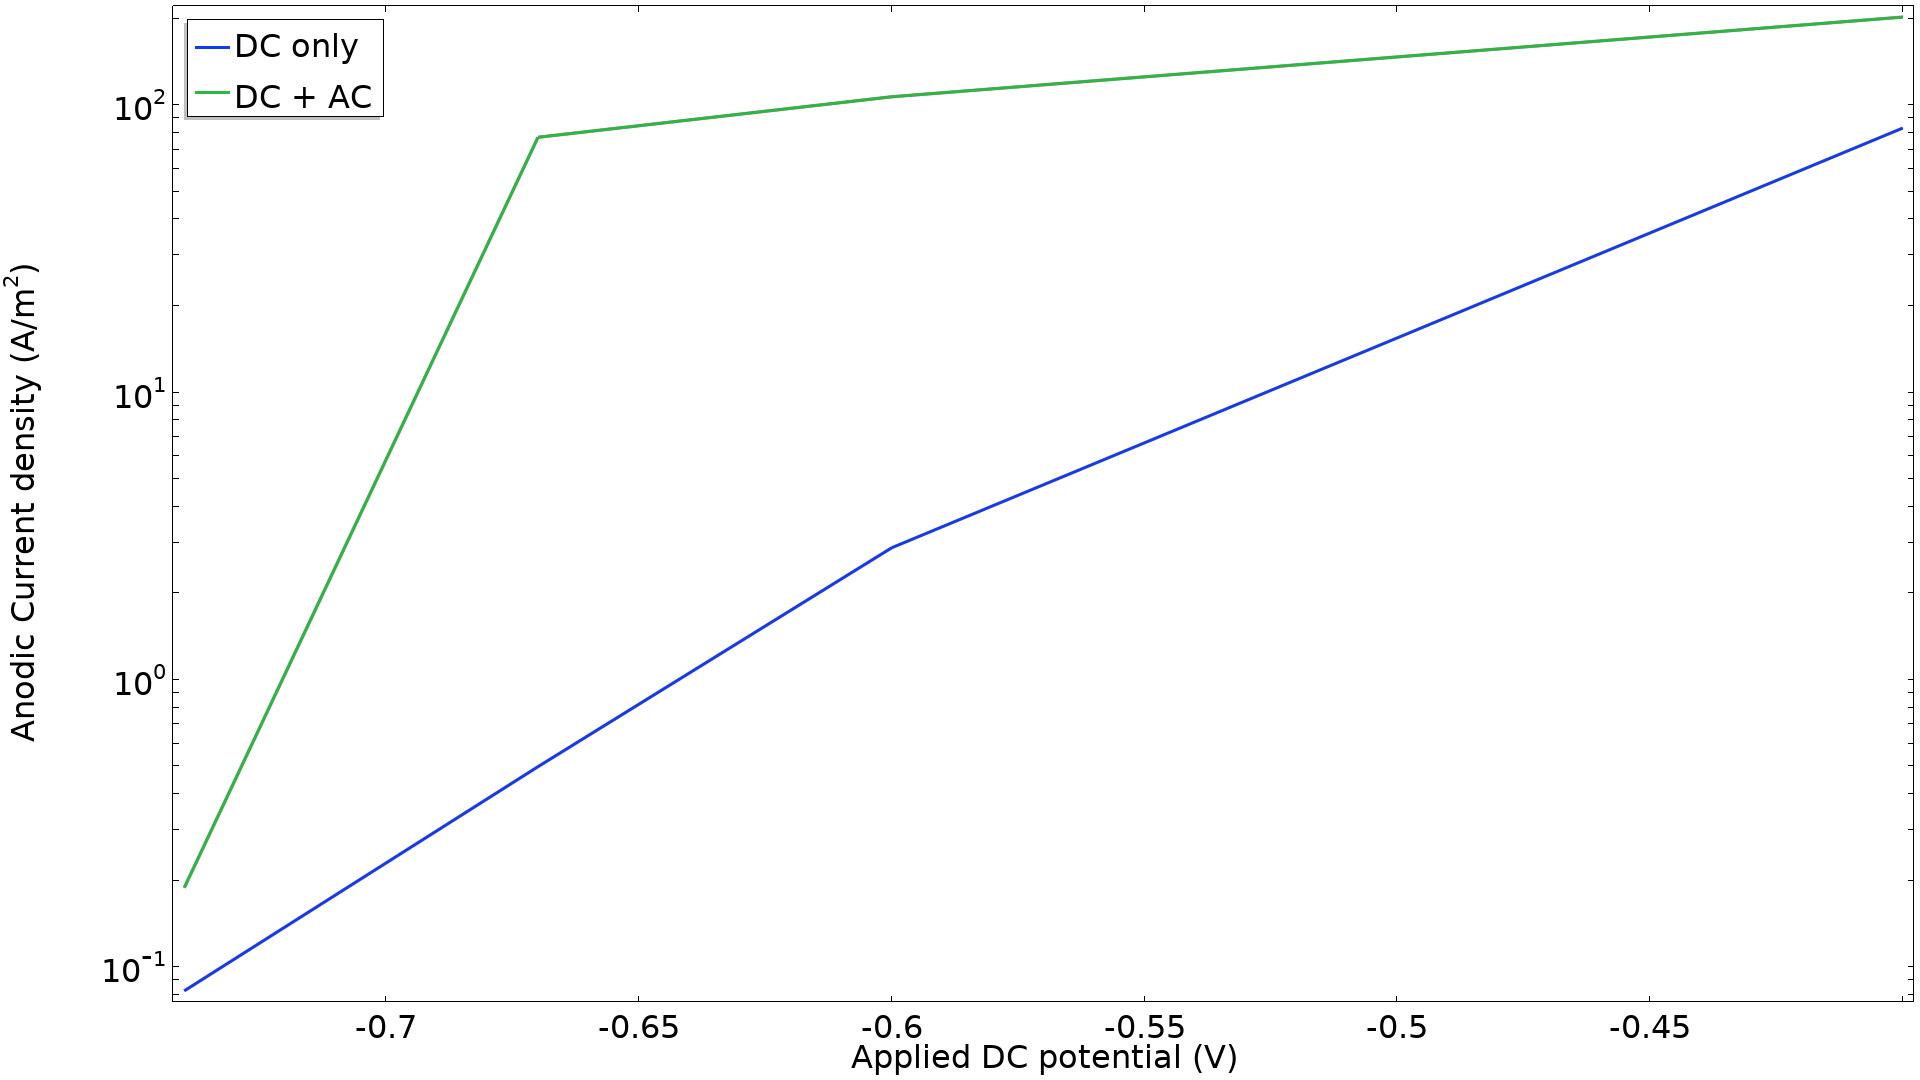 A 1D plot with a green and blue line and anodic current density on the y-axis and applied DC potential on the x-axis.